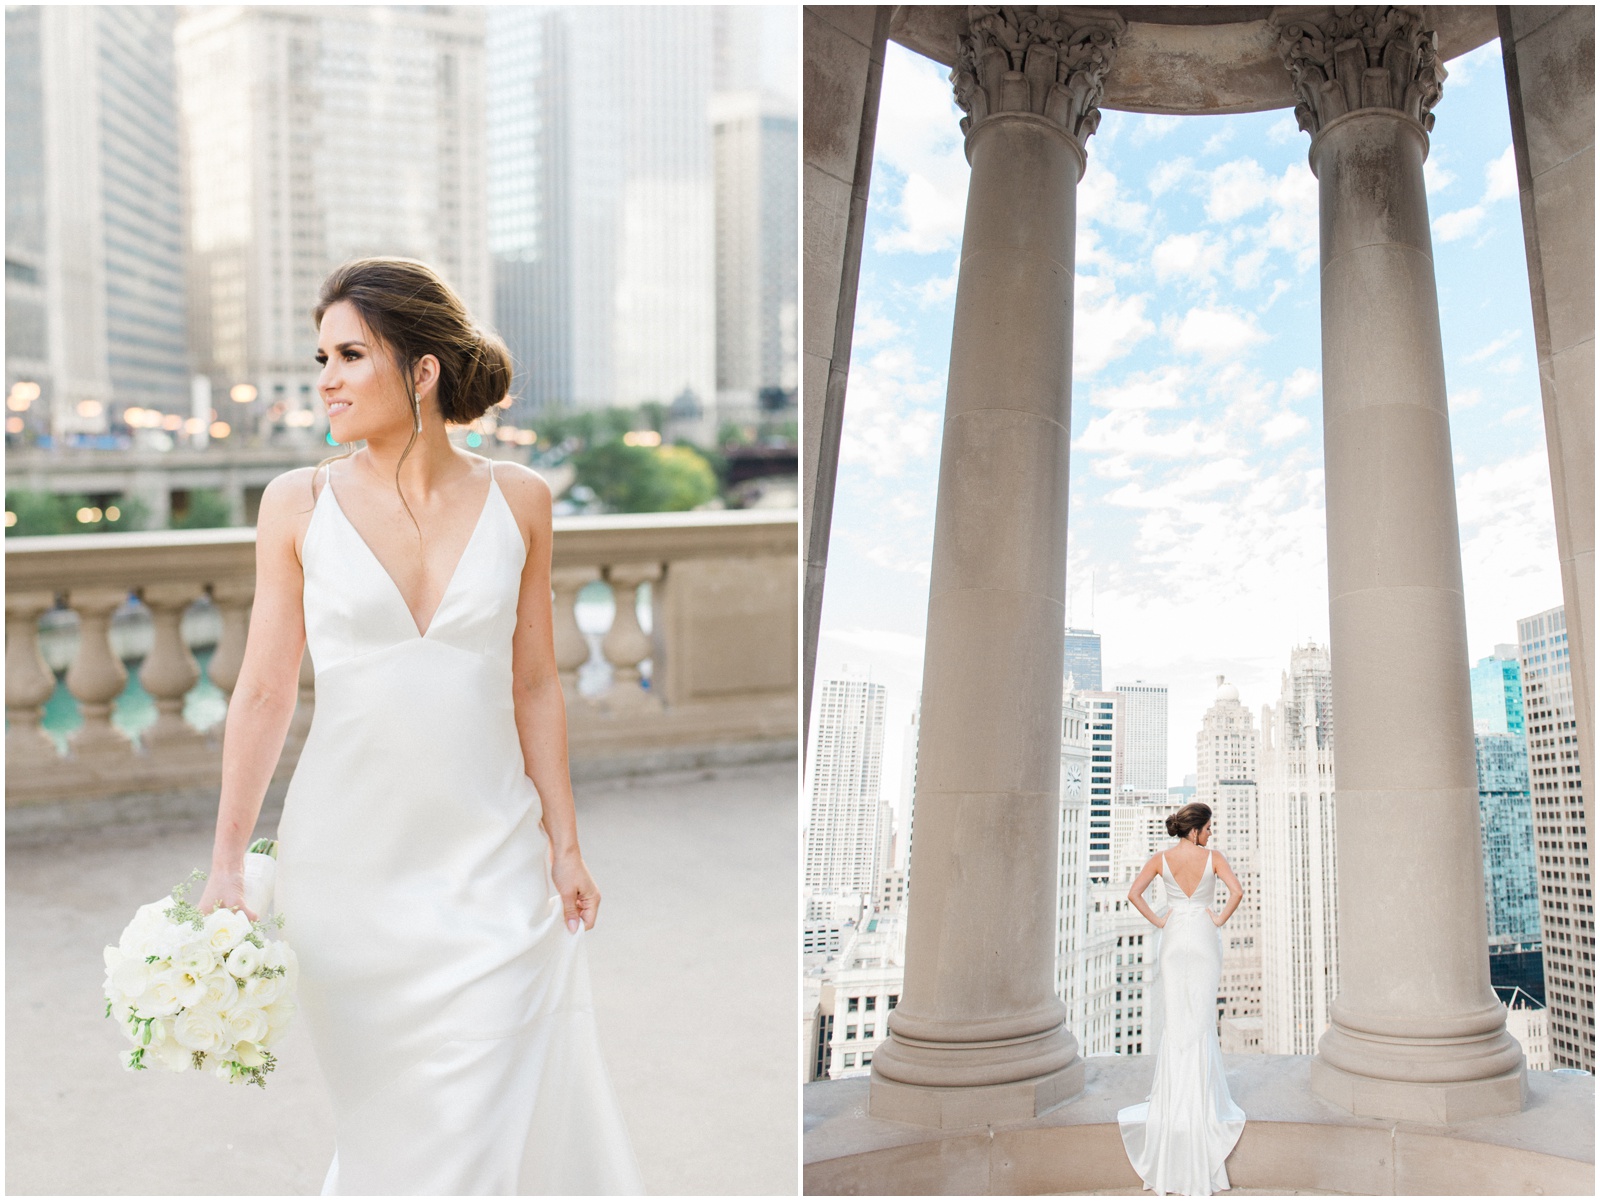 Where to Find Your Wedding Dress in Chicago: Alice in Ivory Bridal